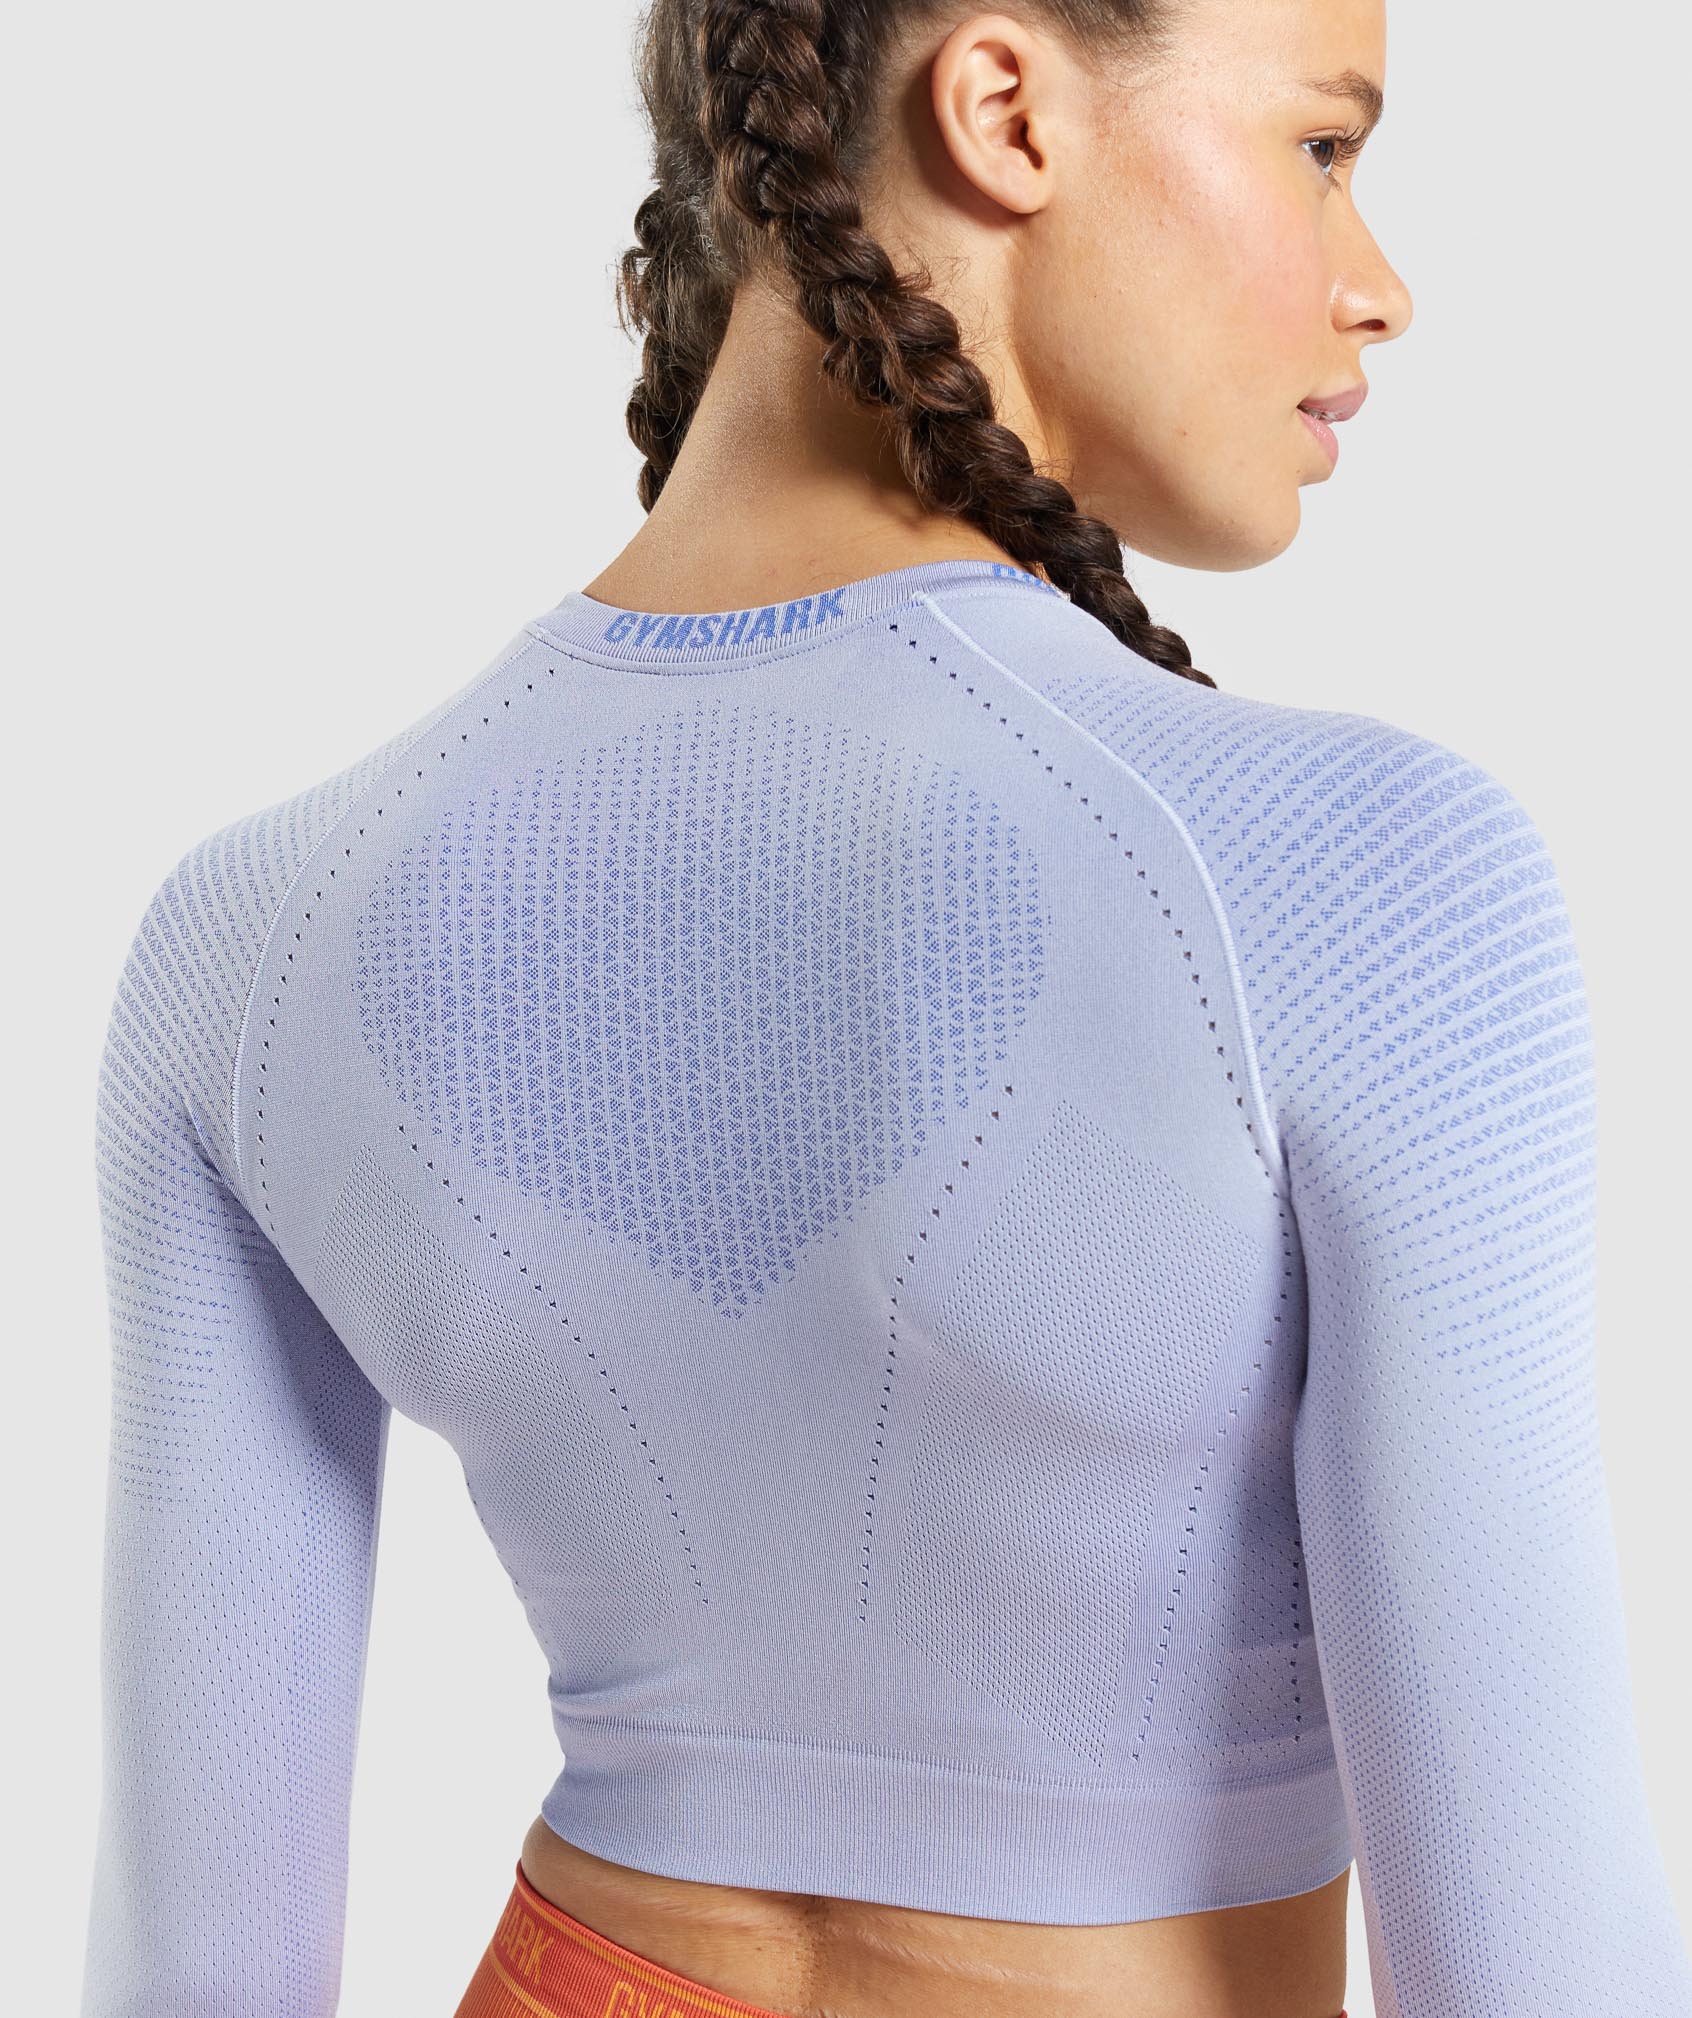 Apex Seamless Crop Top in Lavender Blue/Court Blue - view 6